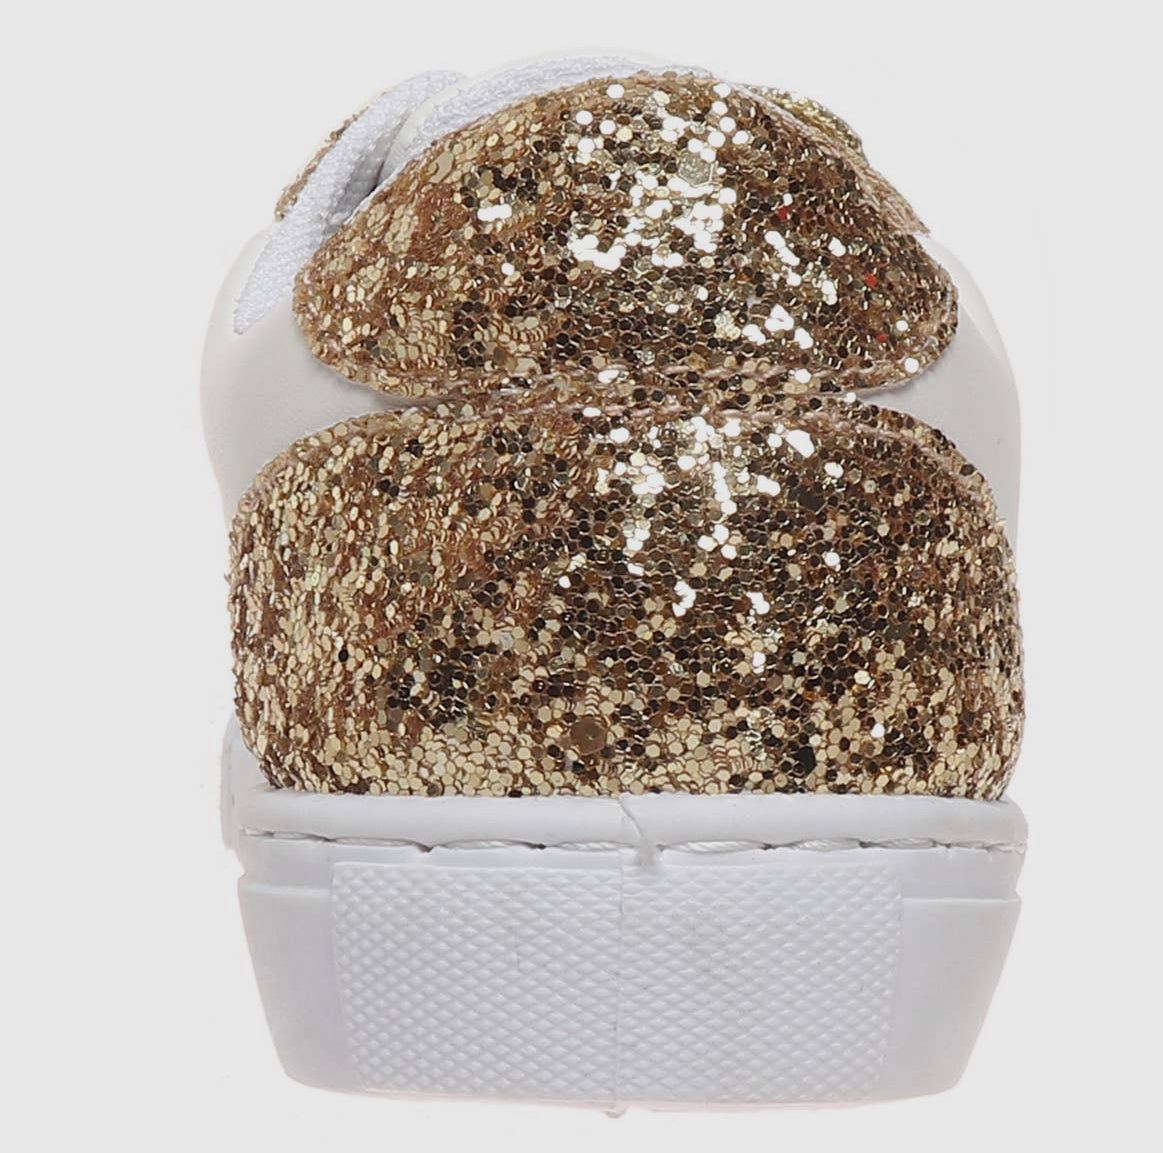 Outwoods Gold Glitter Star Sneakers MM